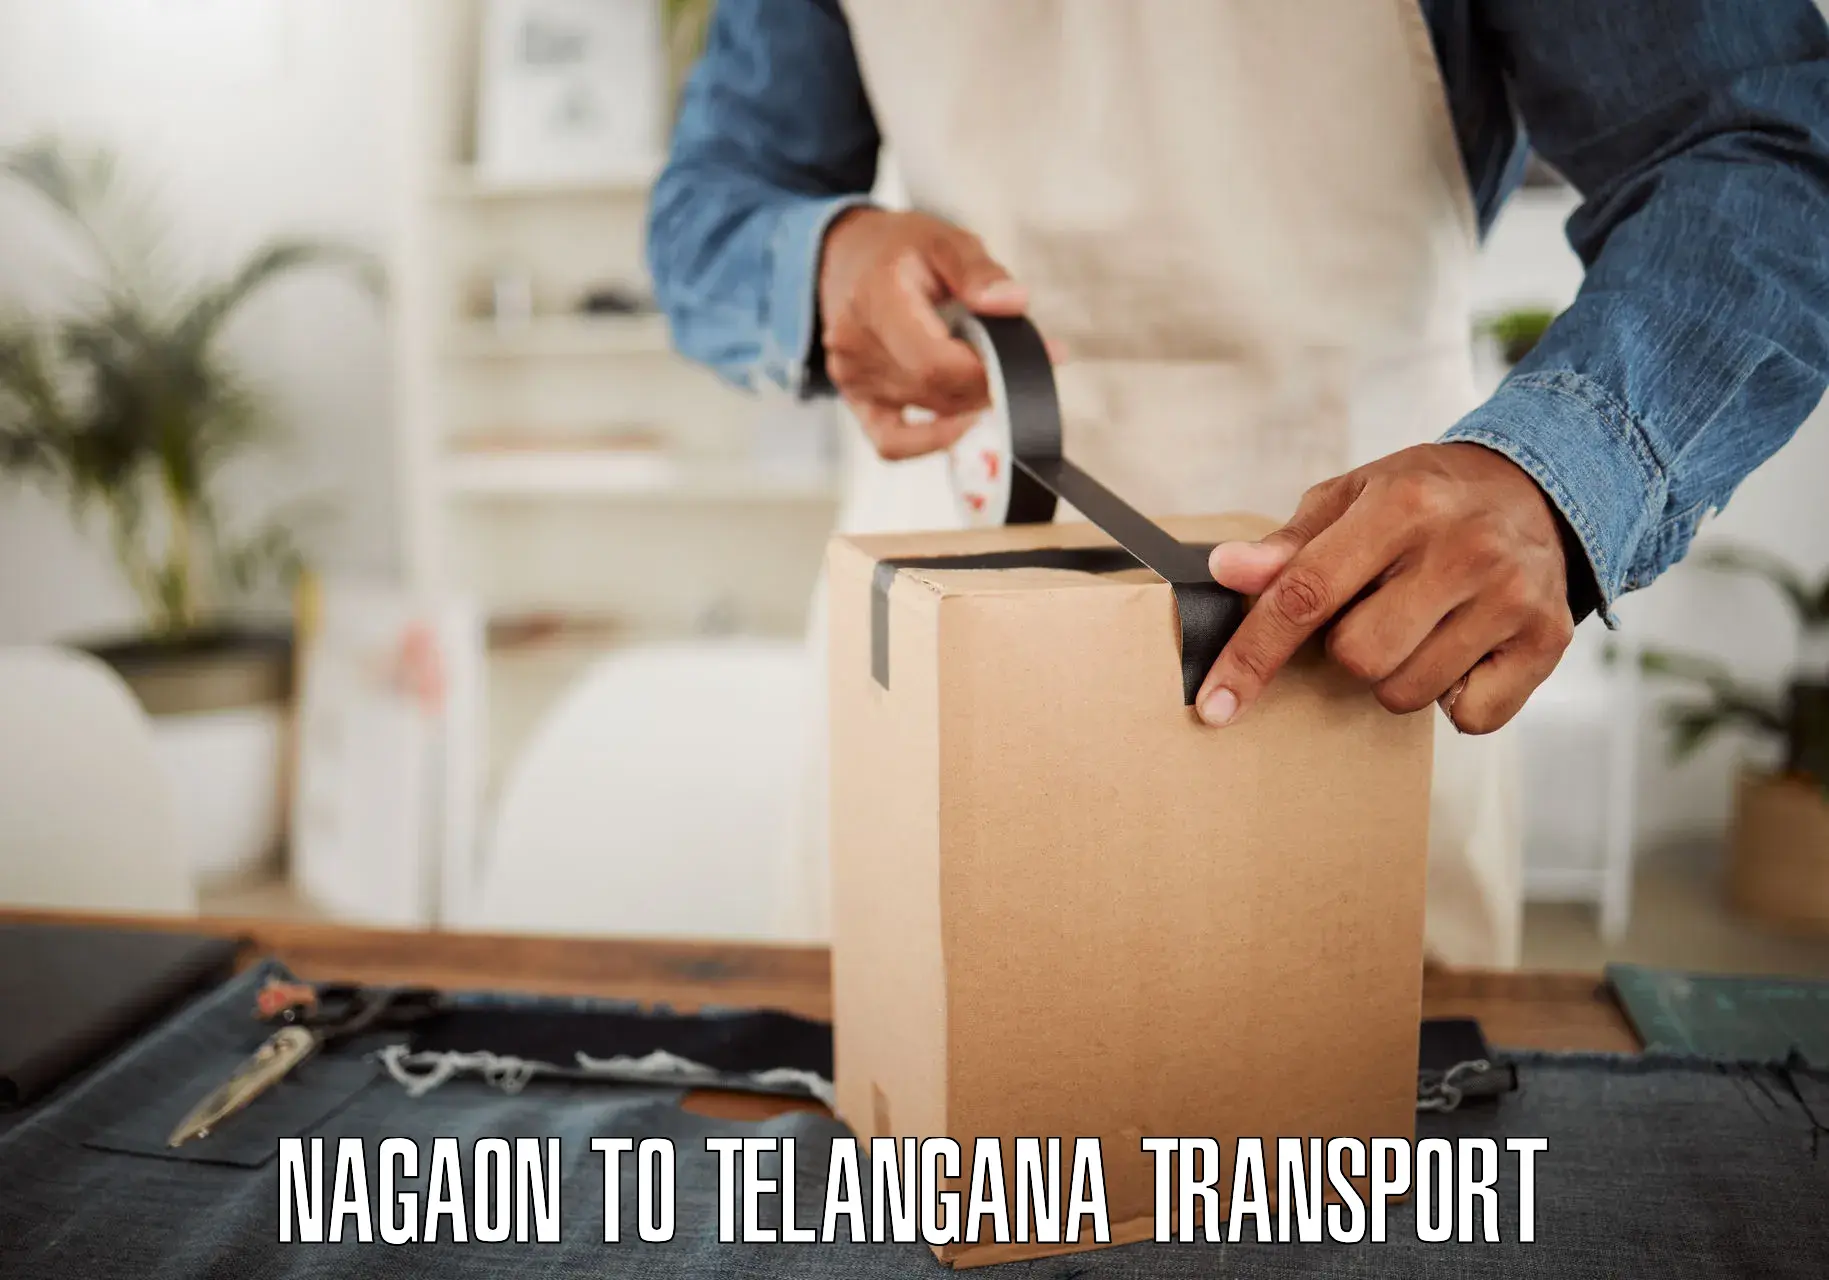 Road transport online services in Nagaon to Narmetta